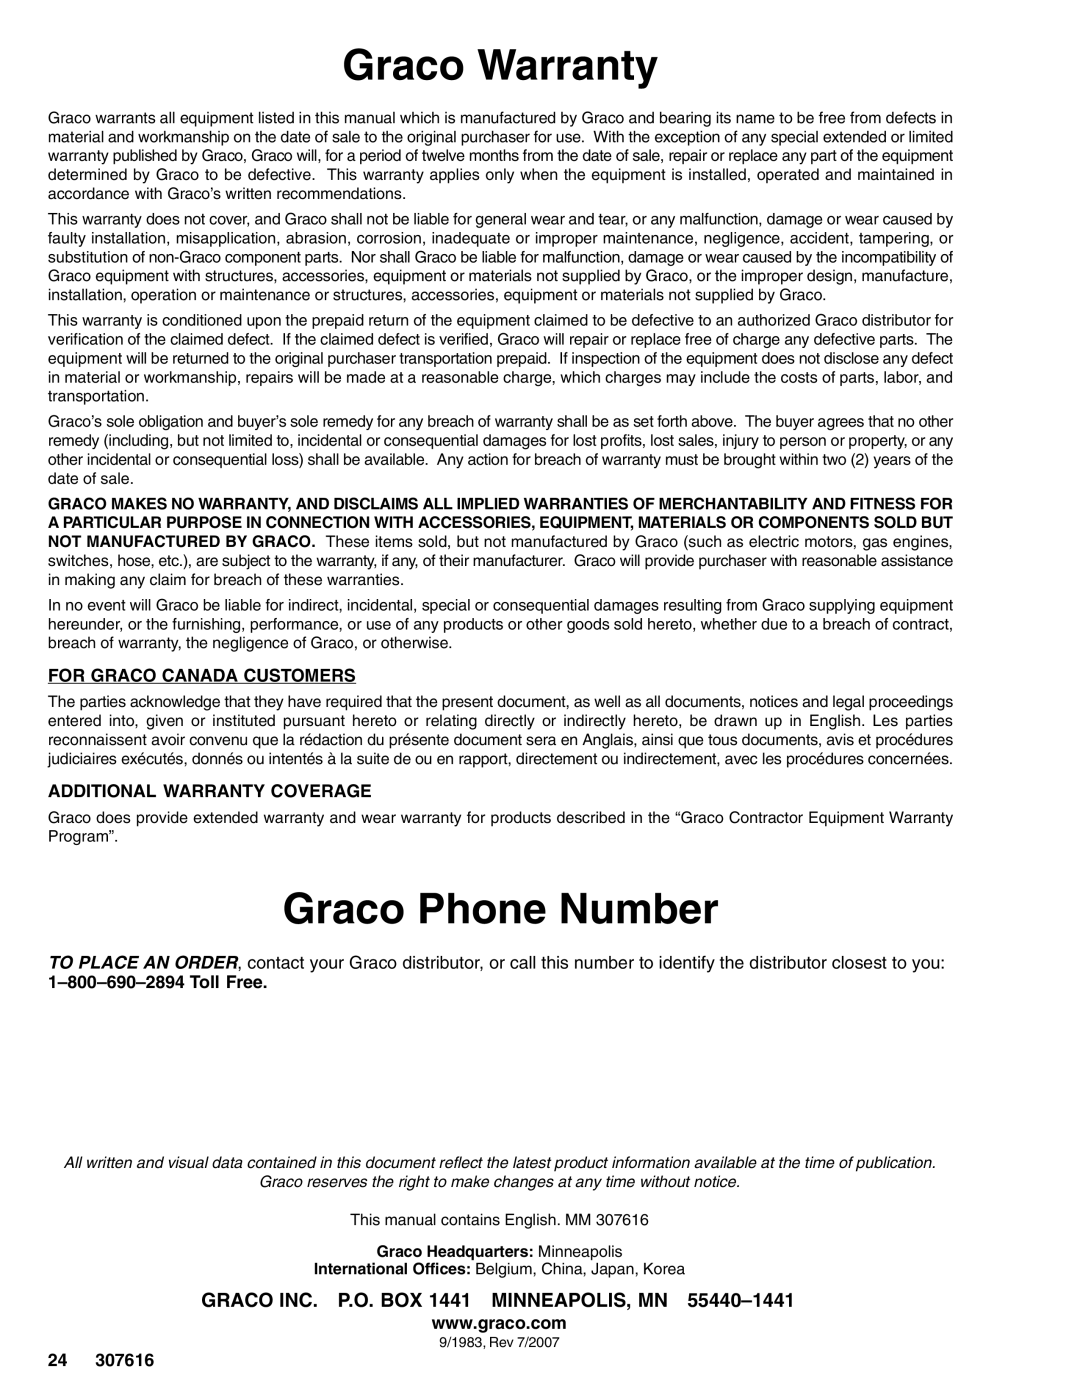 Graco Inc 230975 Graco Warranty, Graco Phone Number, For Graco Canada Customers, Additional Warranty Coverage, Toll Free 